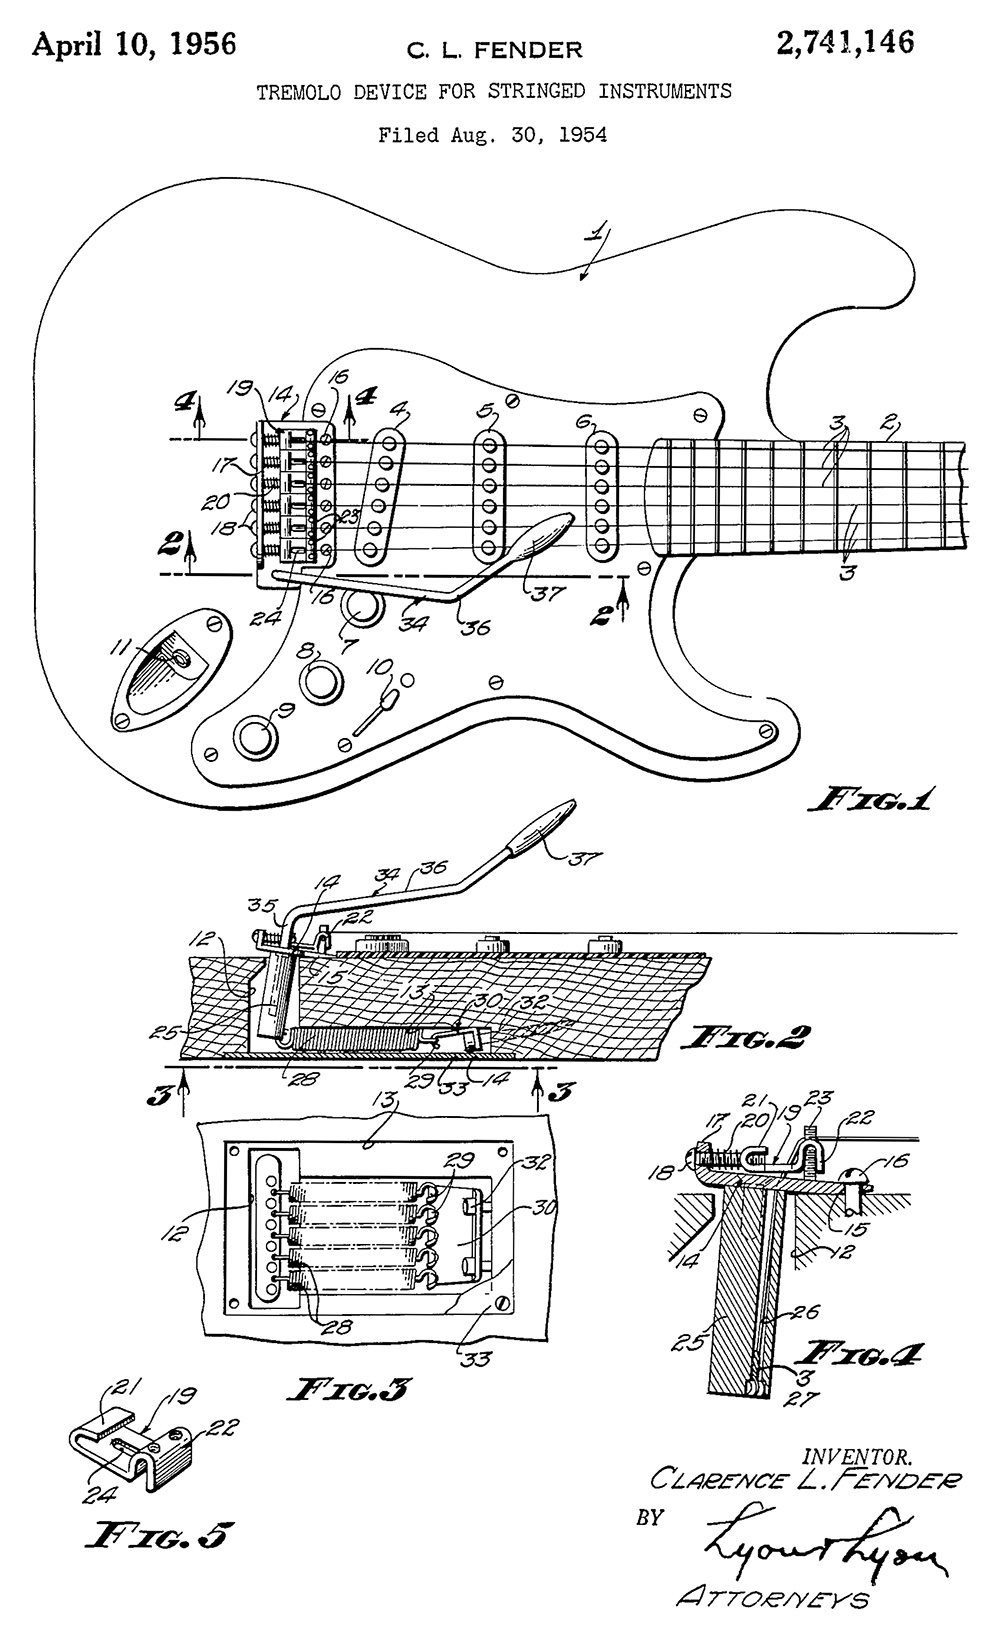 Image of Leo Fender's patent for the tremolo system